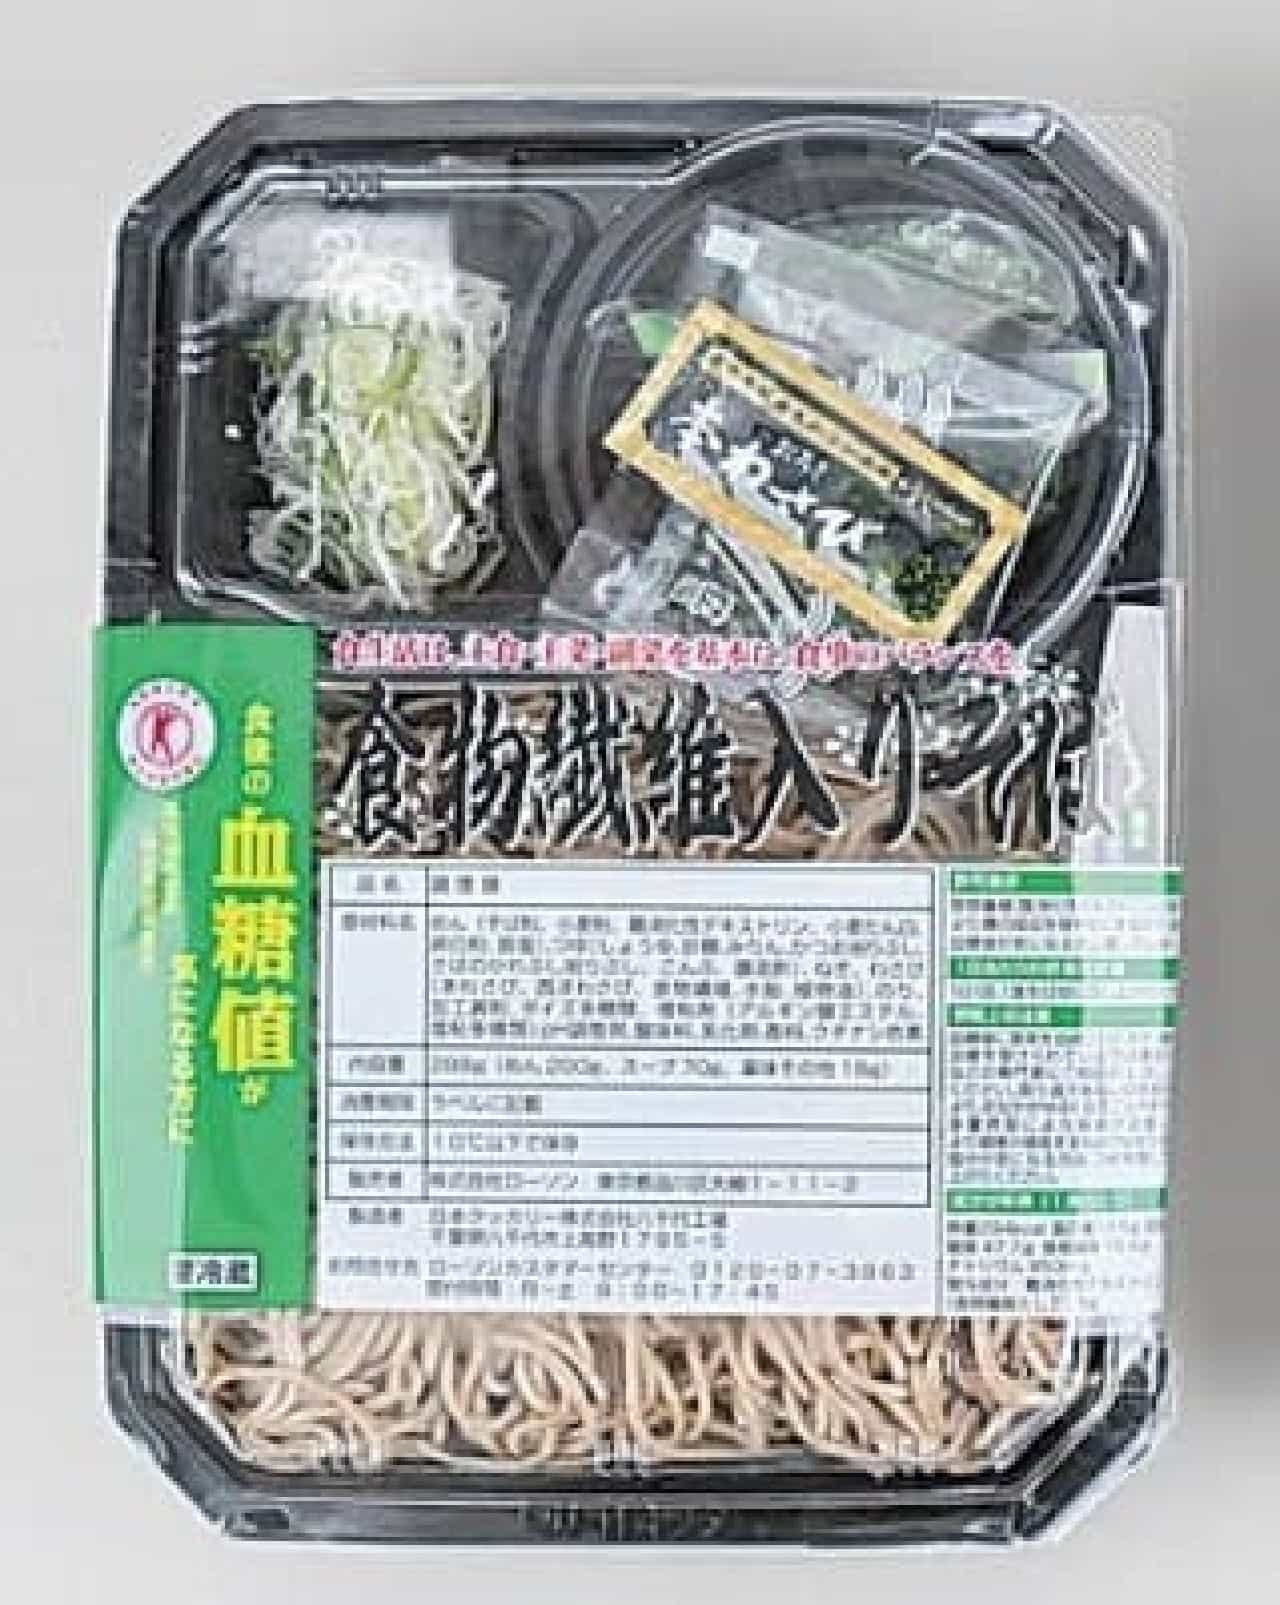 Tokuho's "Soba" is now available at Lawson!